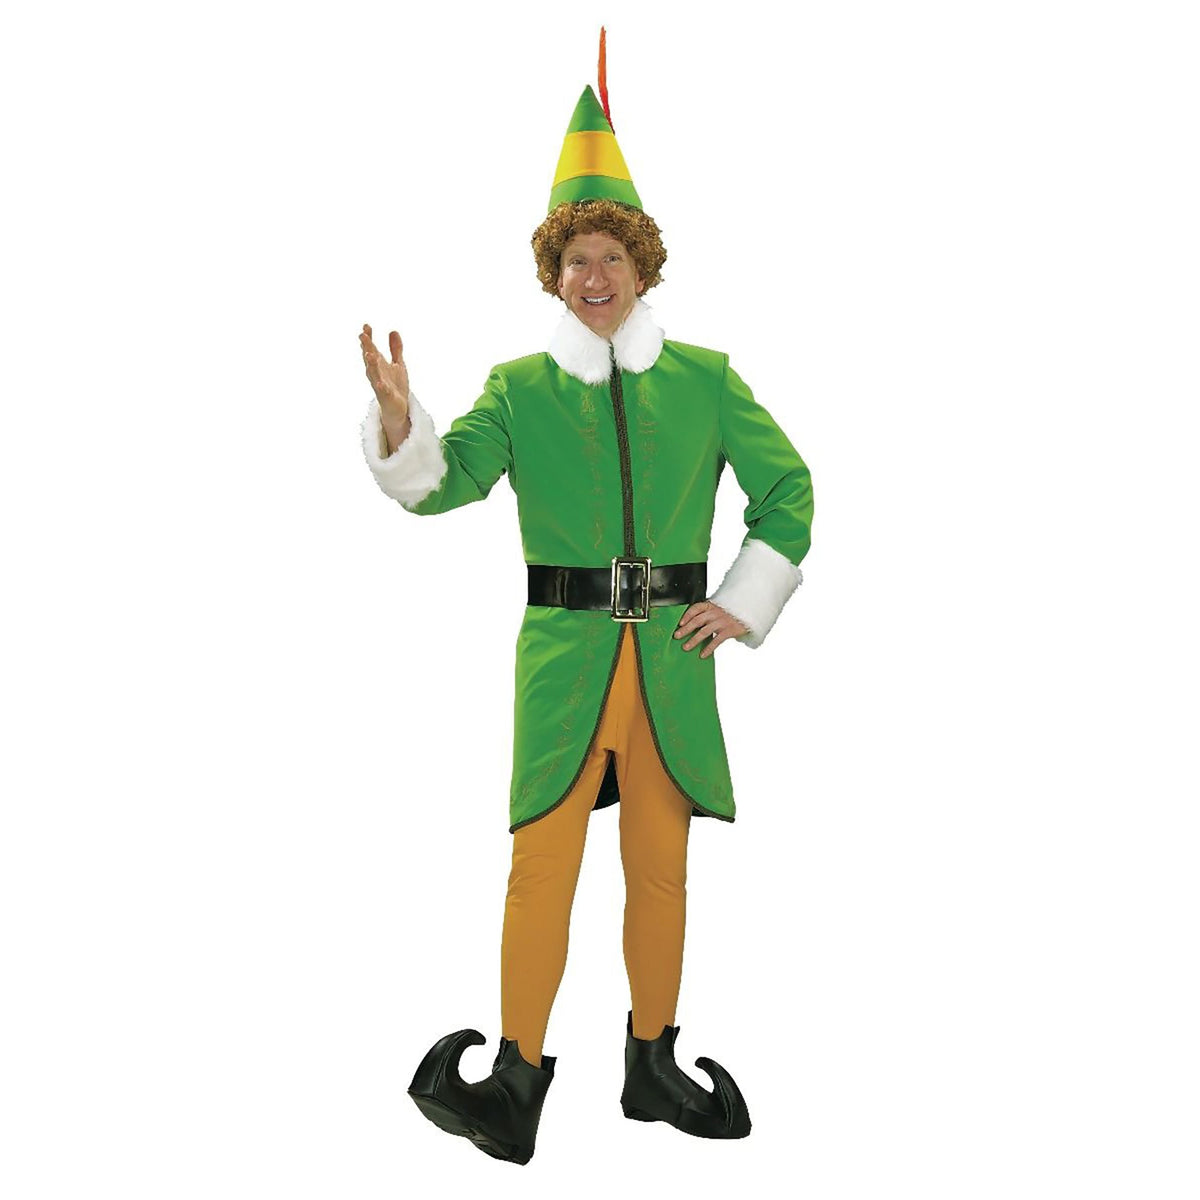 RUBIES II (Ruby Slipper Sales) Christmas Buddy the Elf Deluxe Costume for Adults